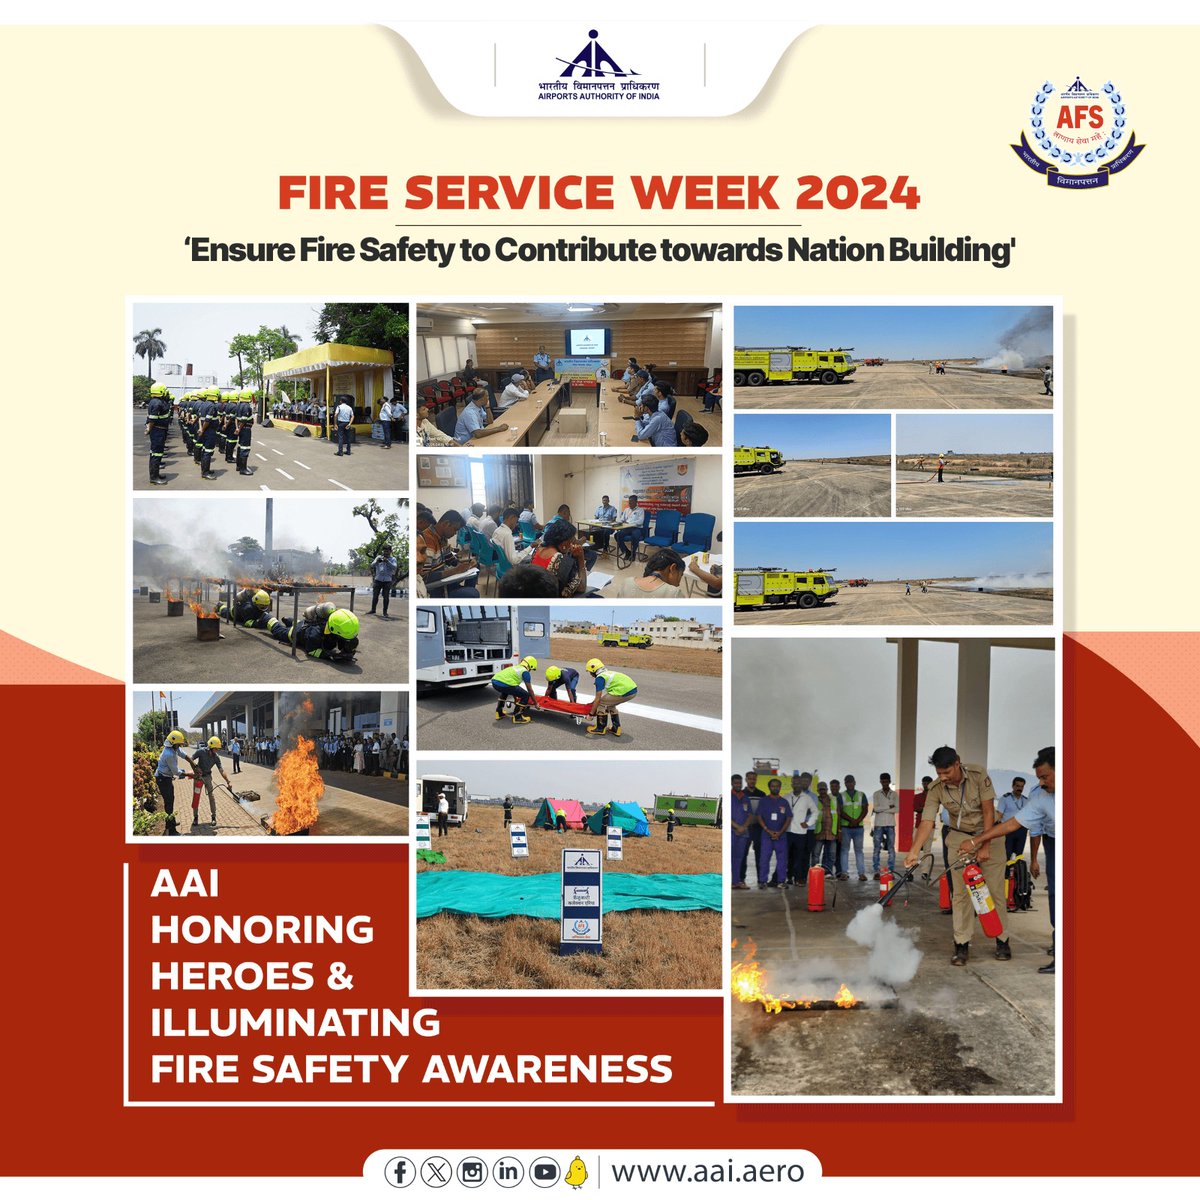 The Airports Authority of India, dedicated to ensuring fire safety across all Indian Airports, concludes Fire Service Week 2024 with a blaze of proactive measure activities, including fire fighting drills and rescue demonstrations for officials and stakeholders. Together, we